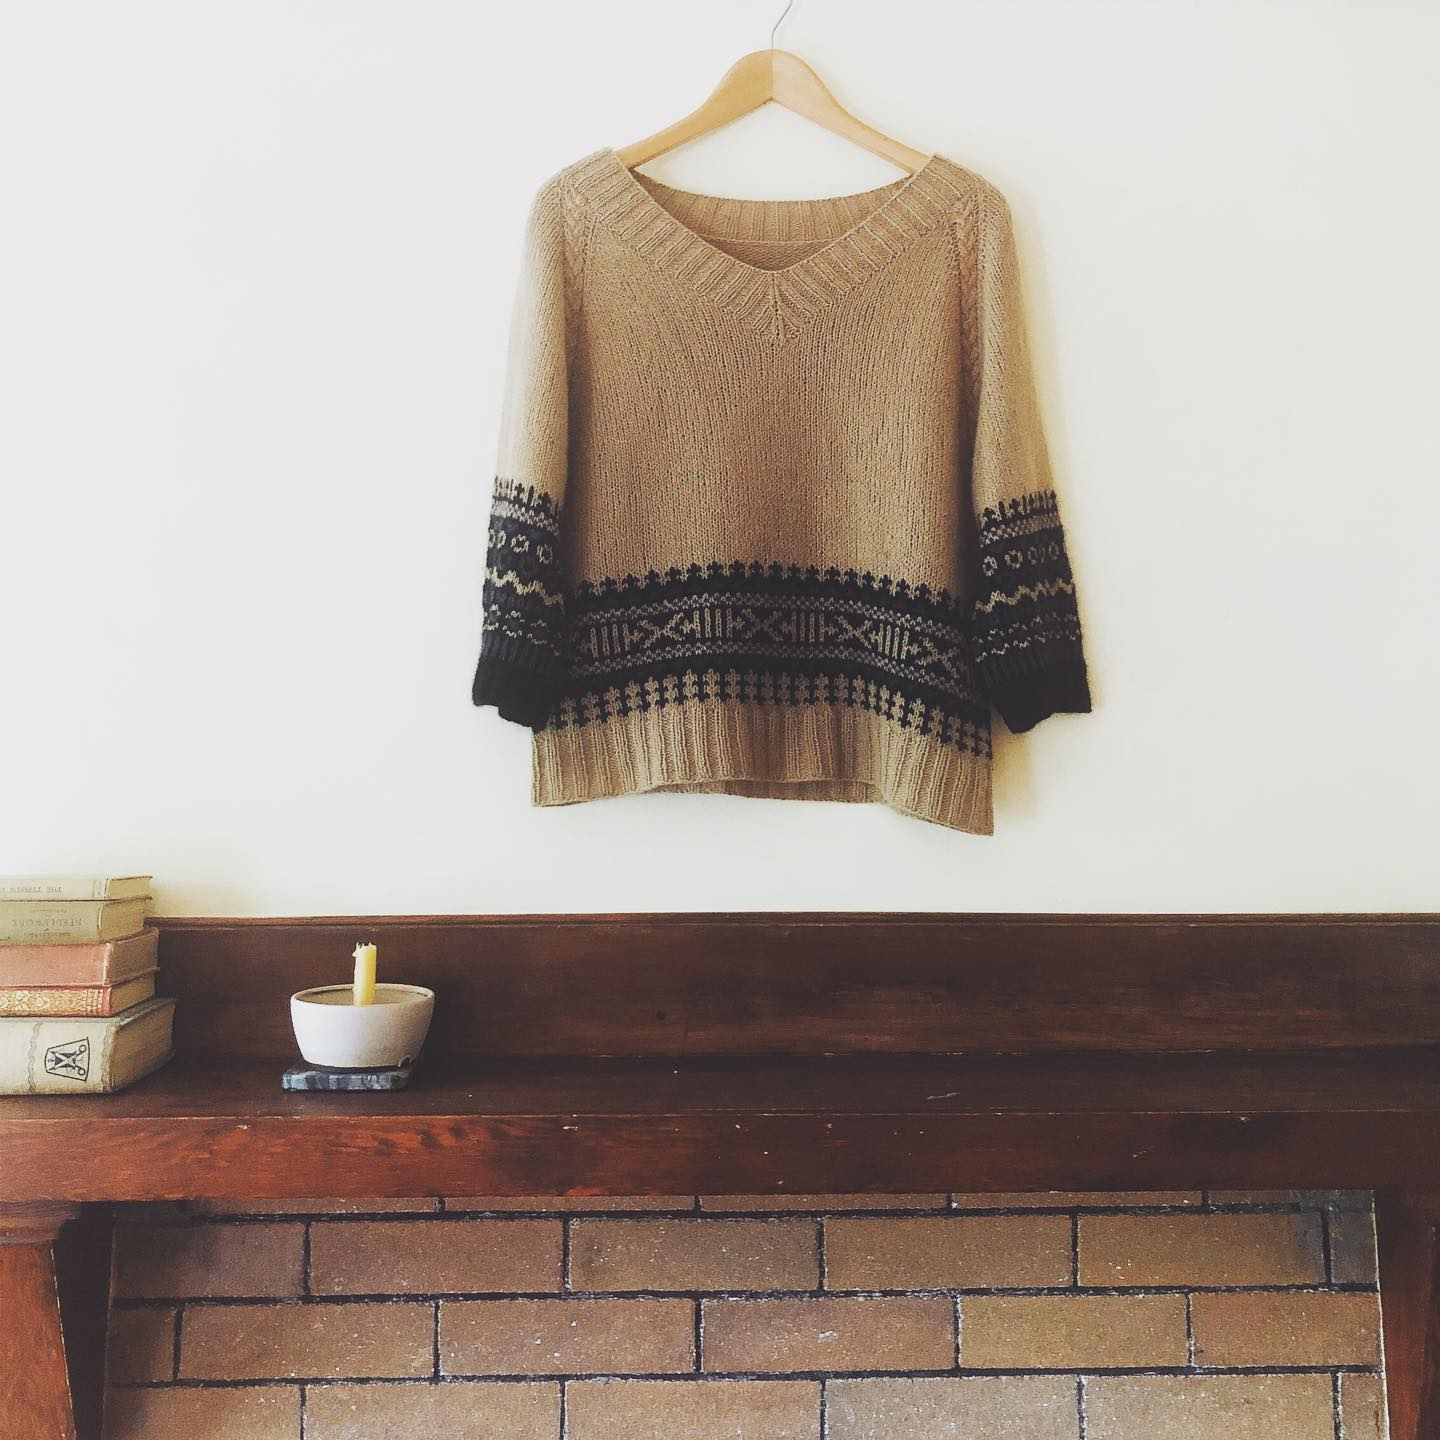 A colorwork pullover on a hanger hanging from a picture rail above a fireplace